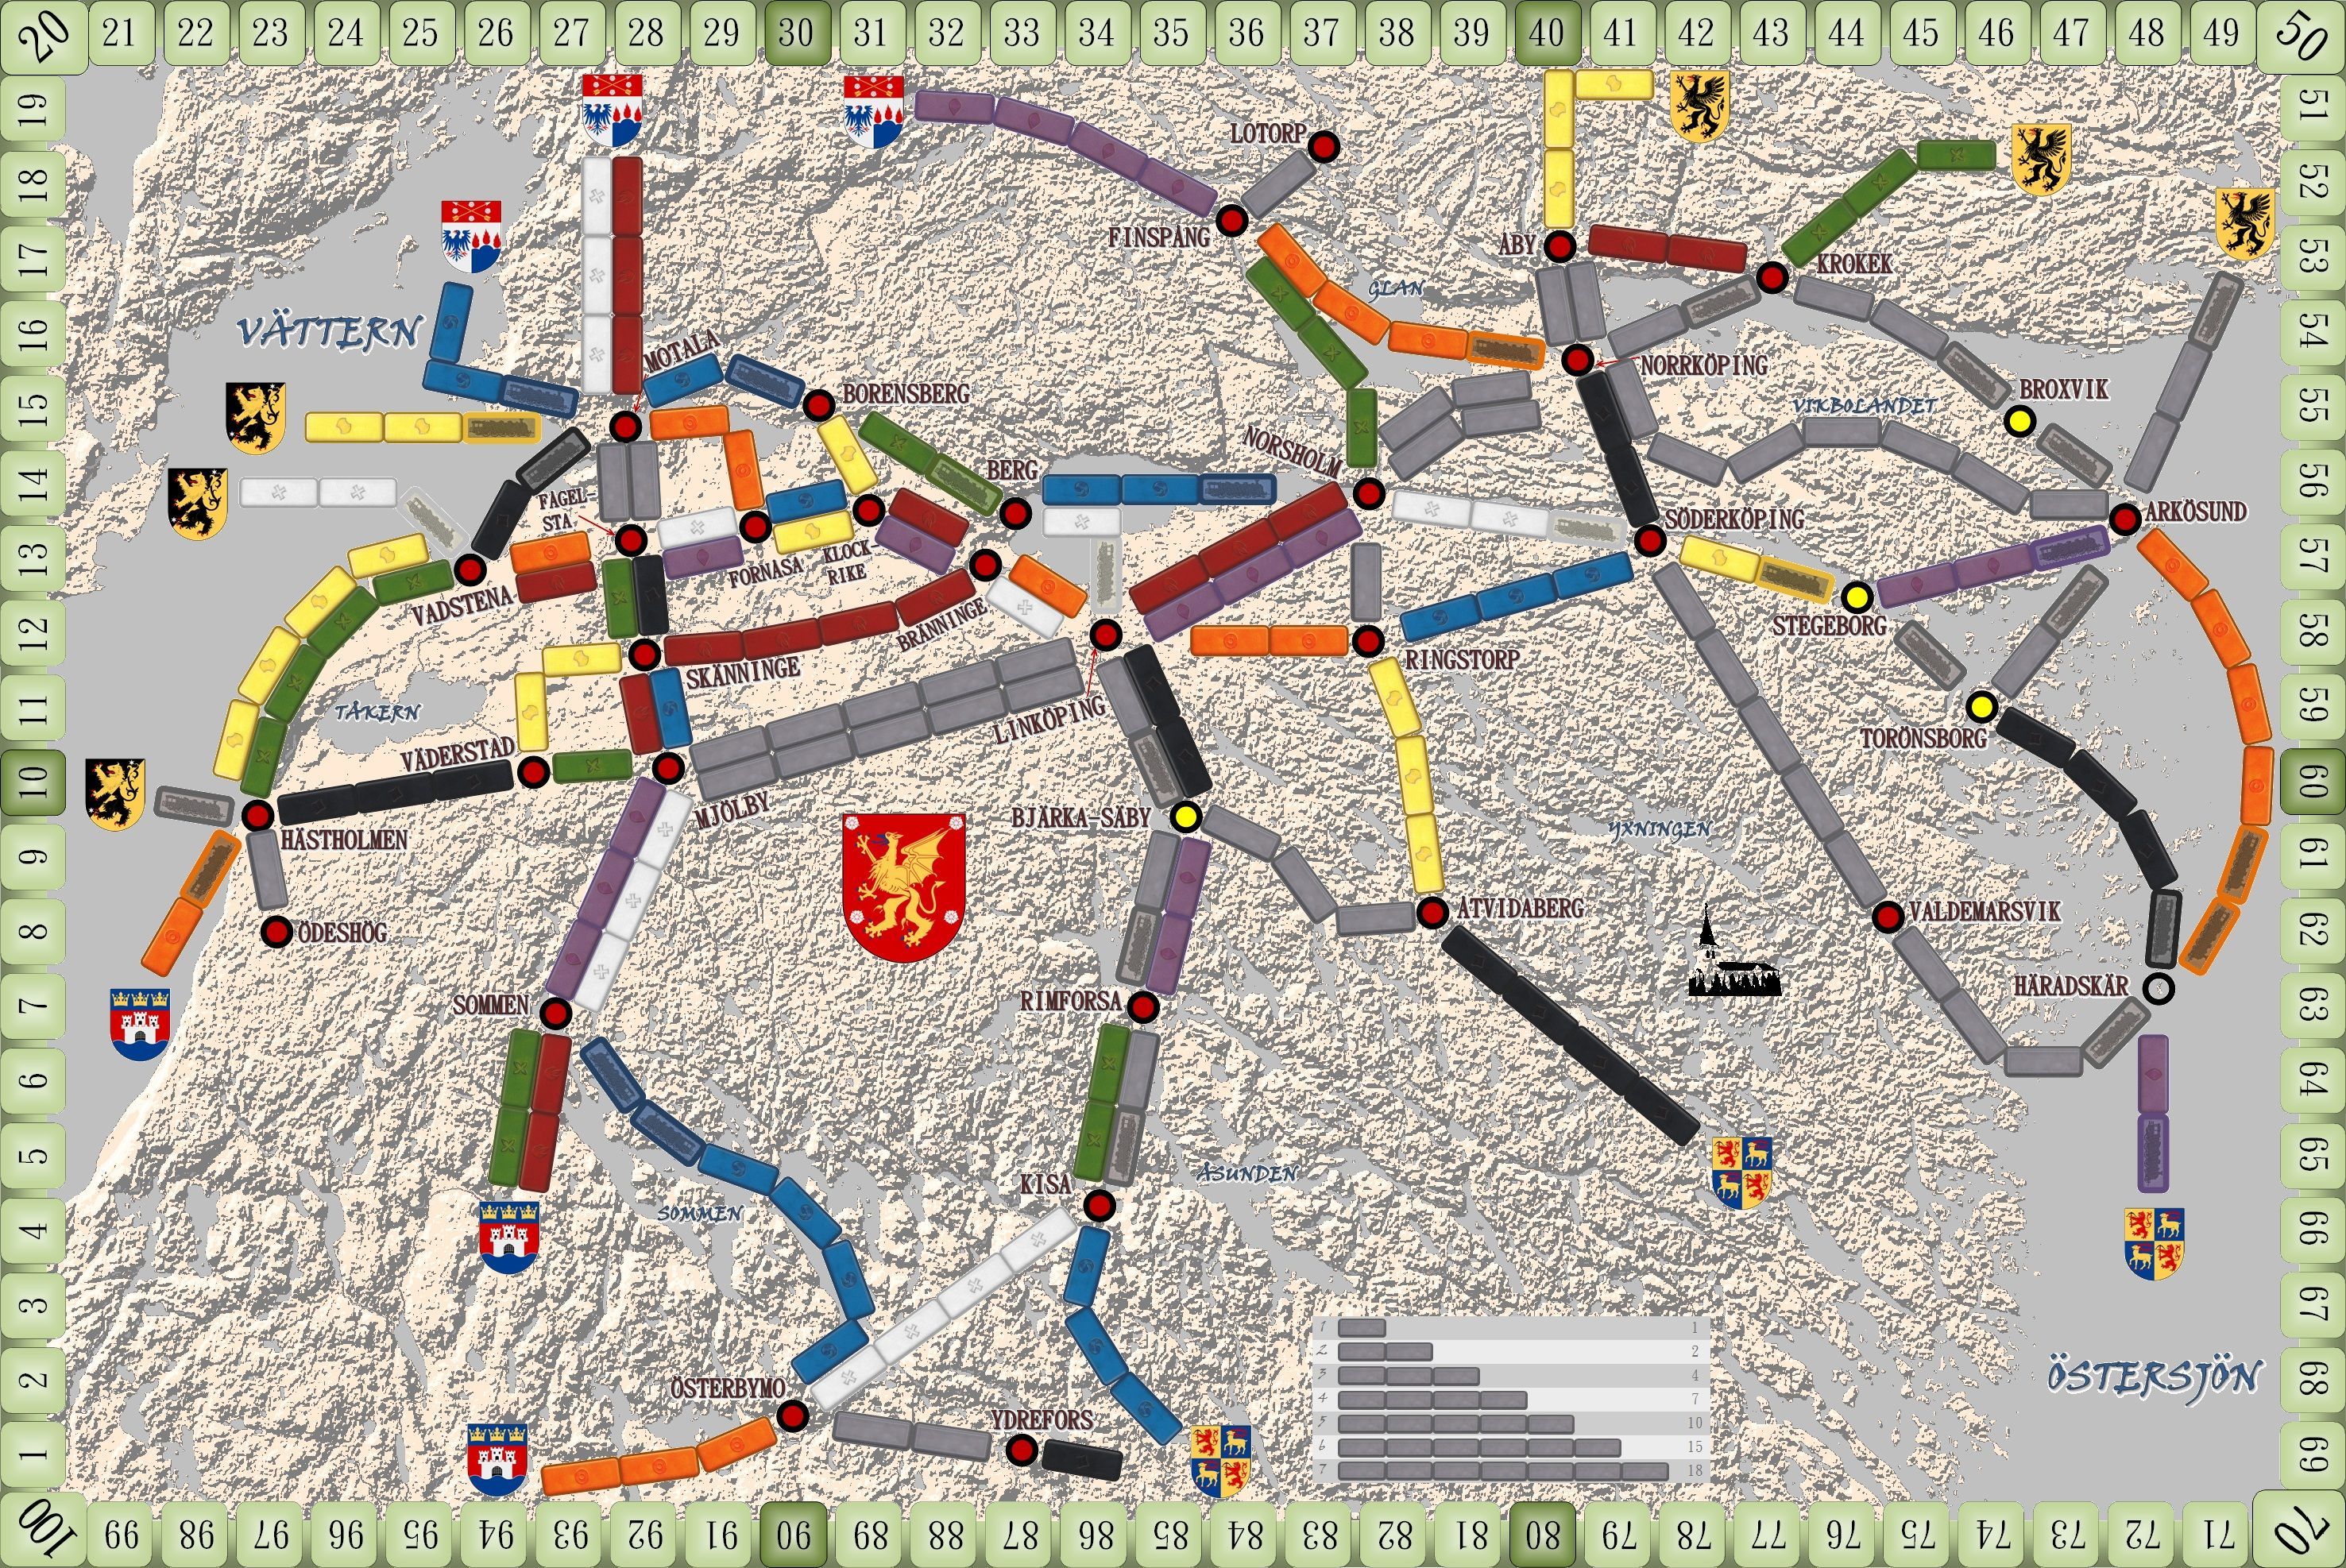 Östergötland in the 1930's (fan expansion for Ticket to Ride)